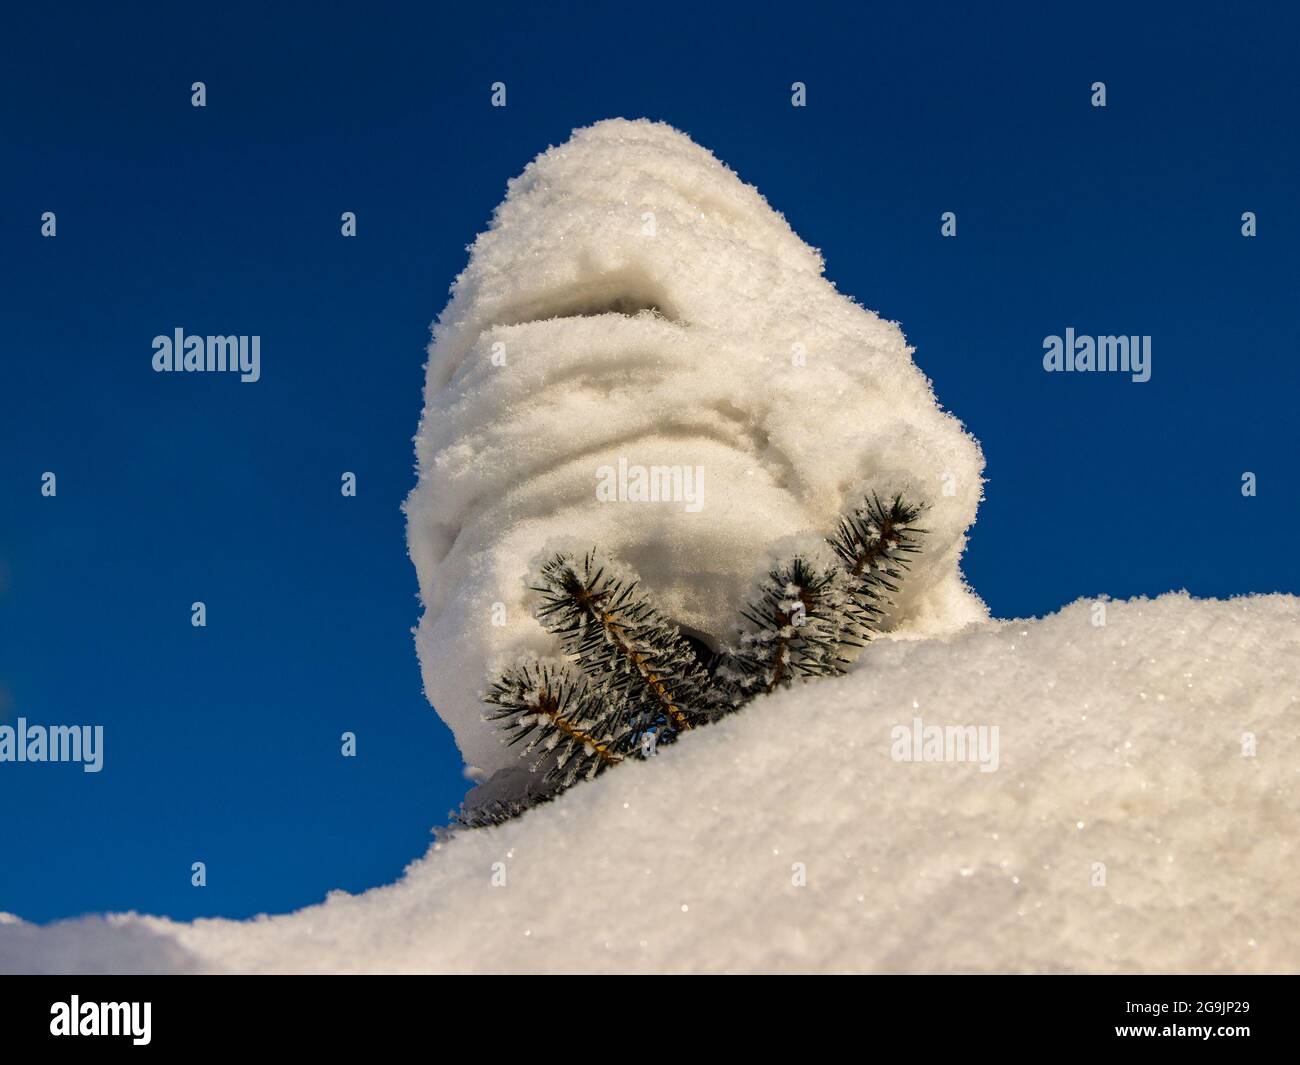 a snowdrift on top of a spruce tree that sticks out from under the snow against a blue sky Stock Photo